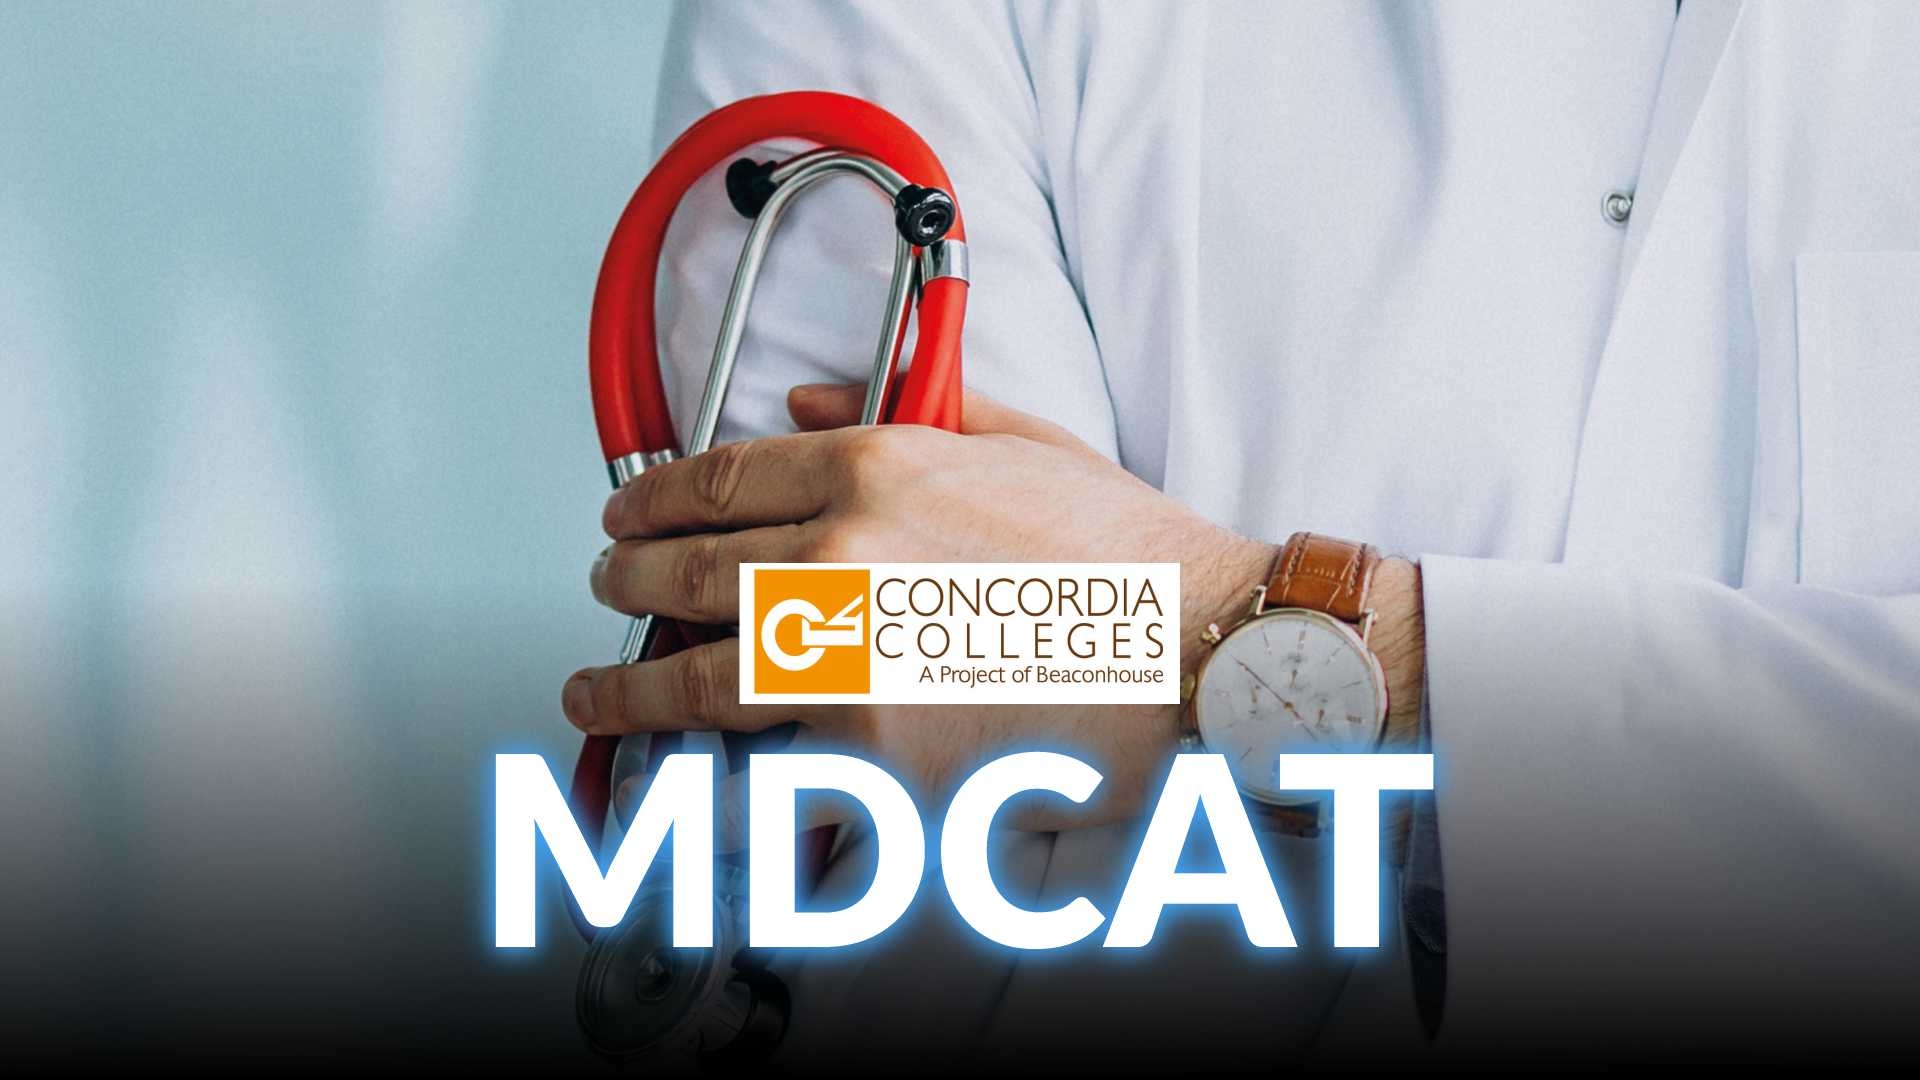 MDCAT Preparation Course for Concordia Colleges